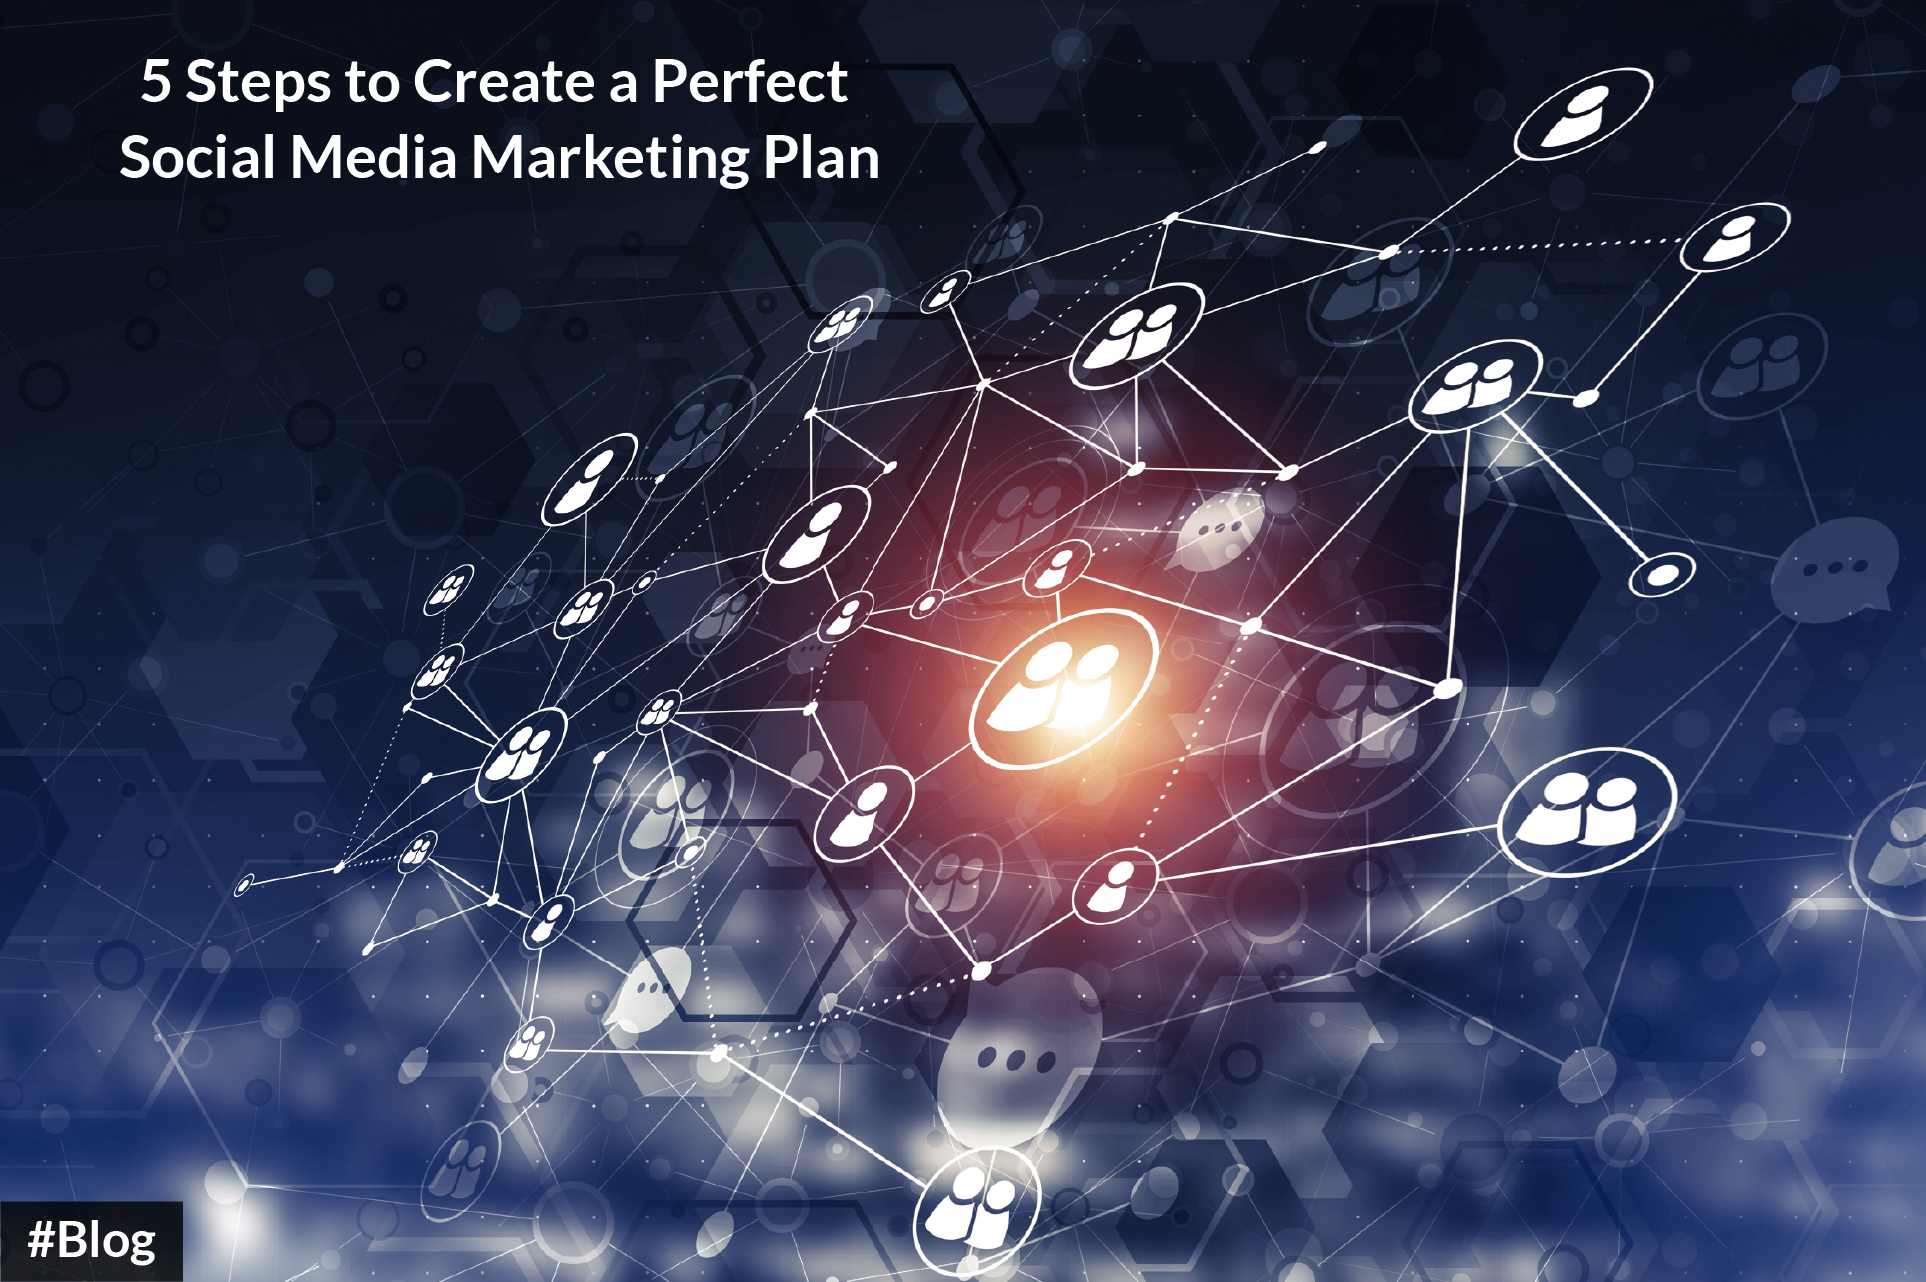 5 Steps to Create a Perfect Social Media Marketing Plan